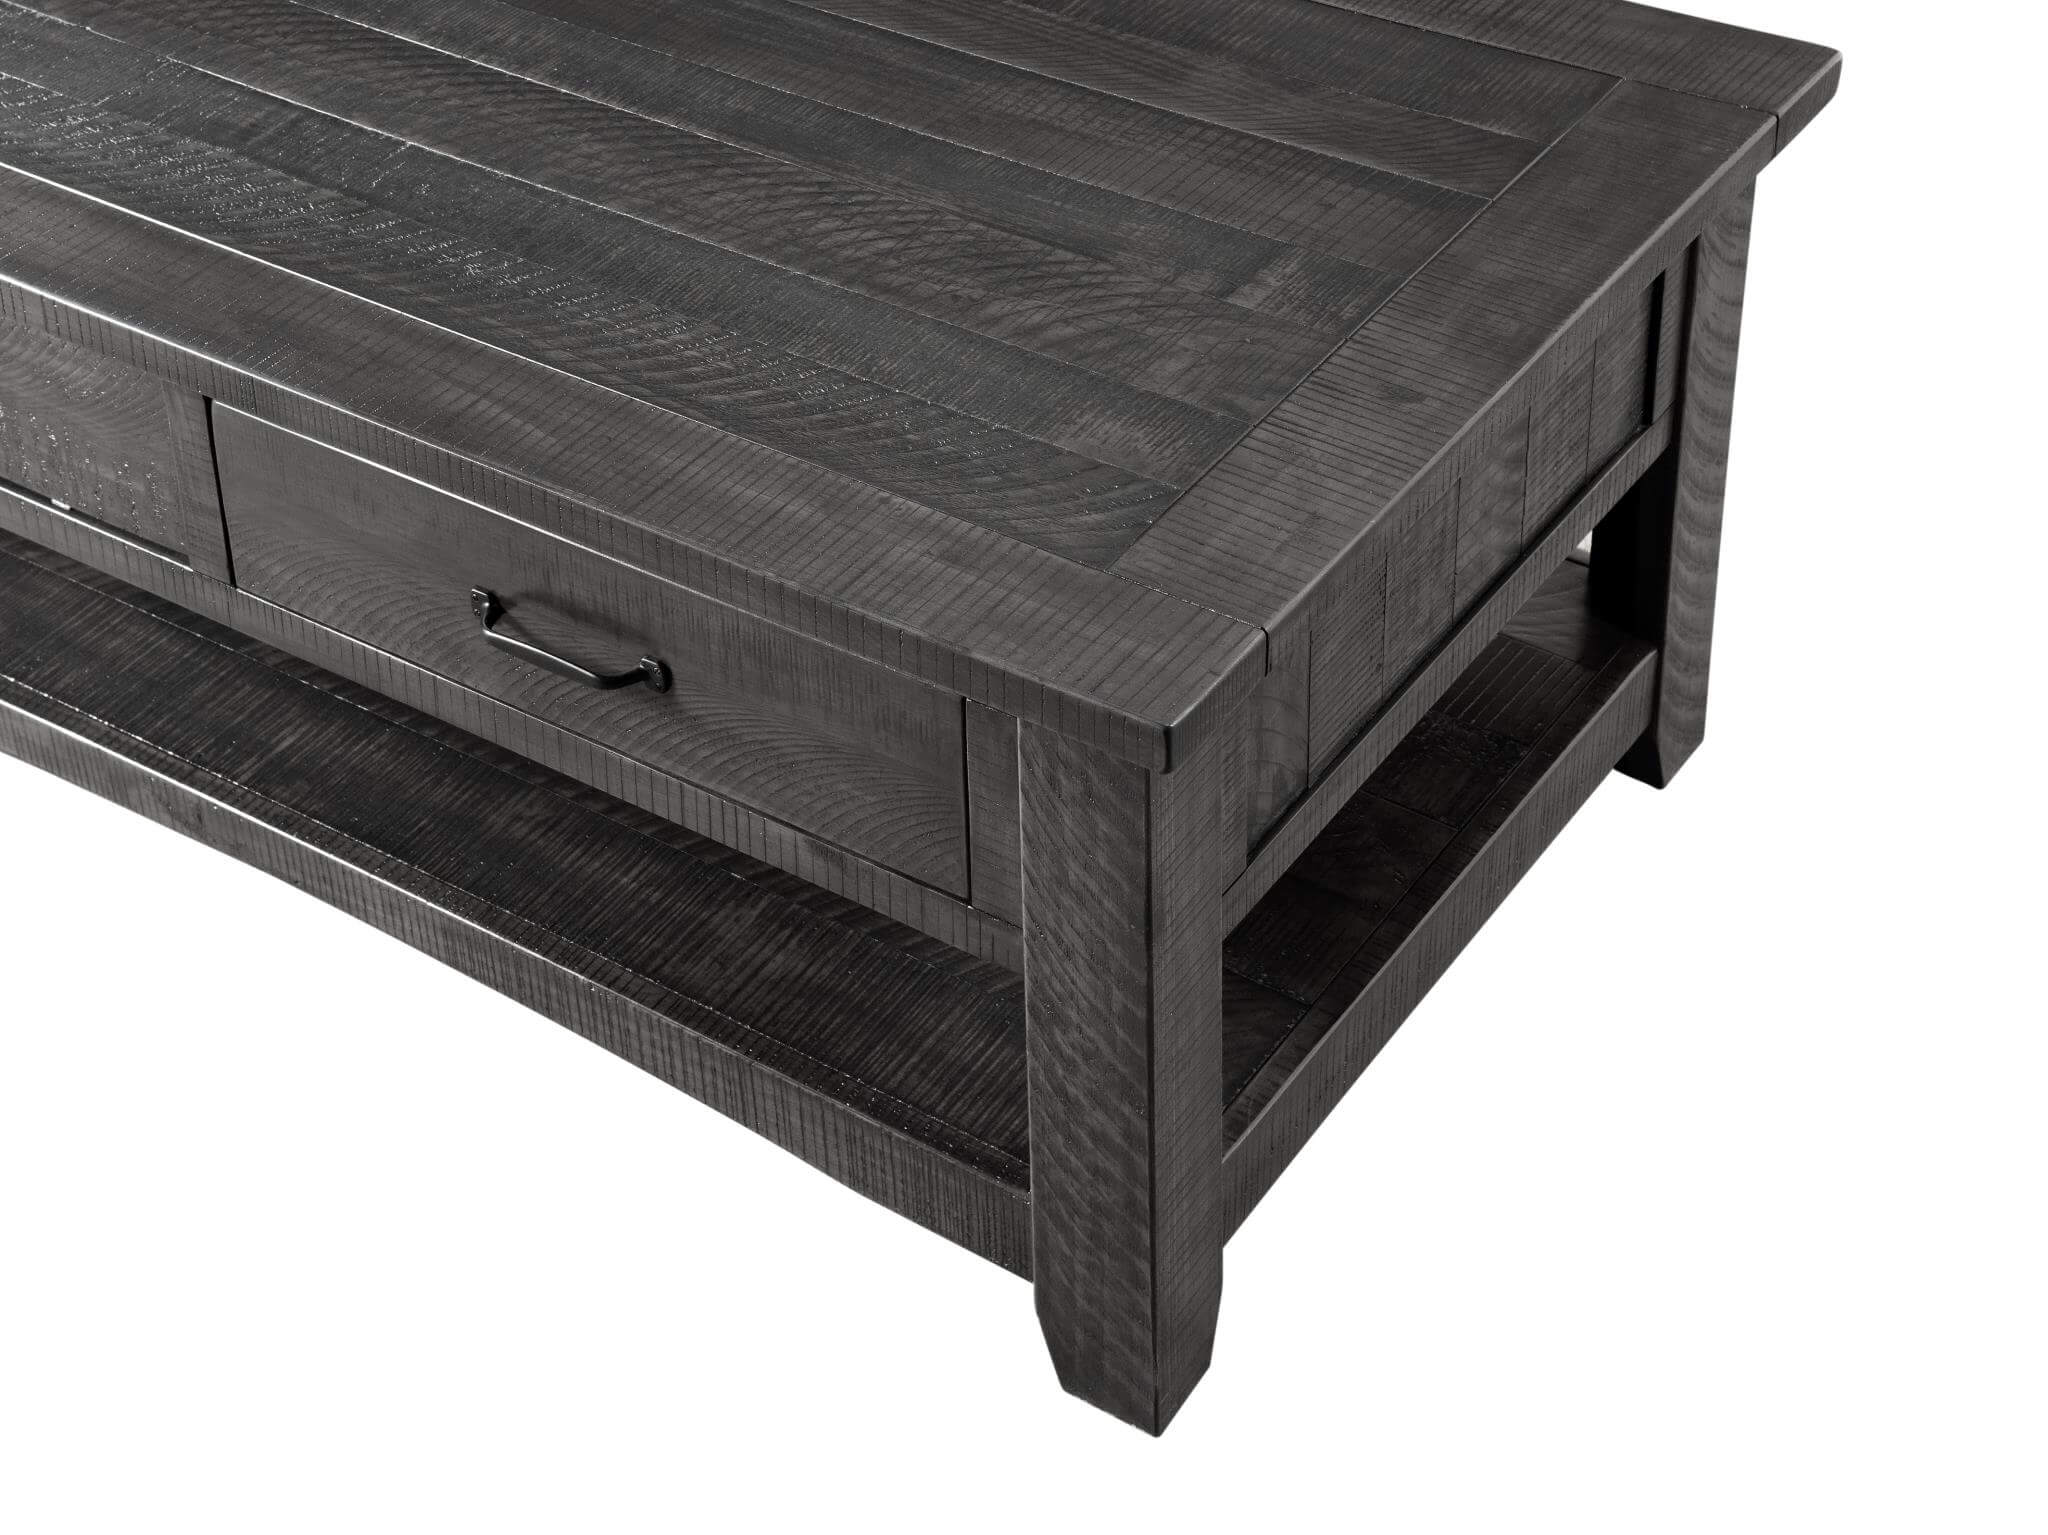 Rustic Grey Coffee Table details by Martin Svensson Home product image